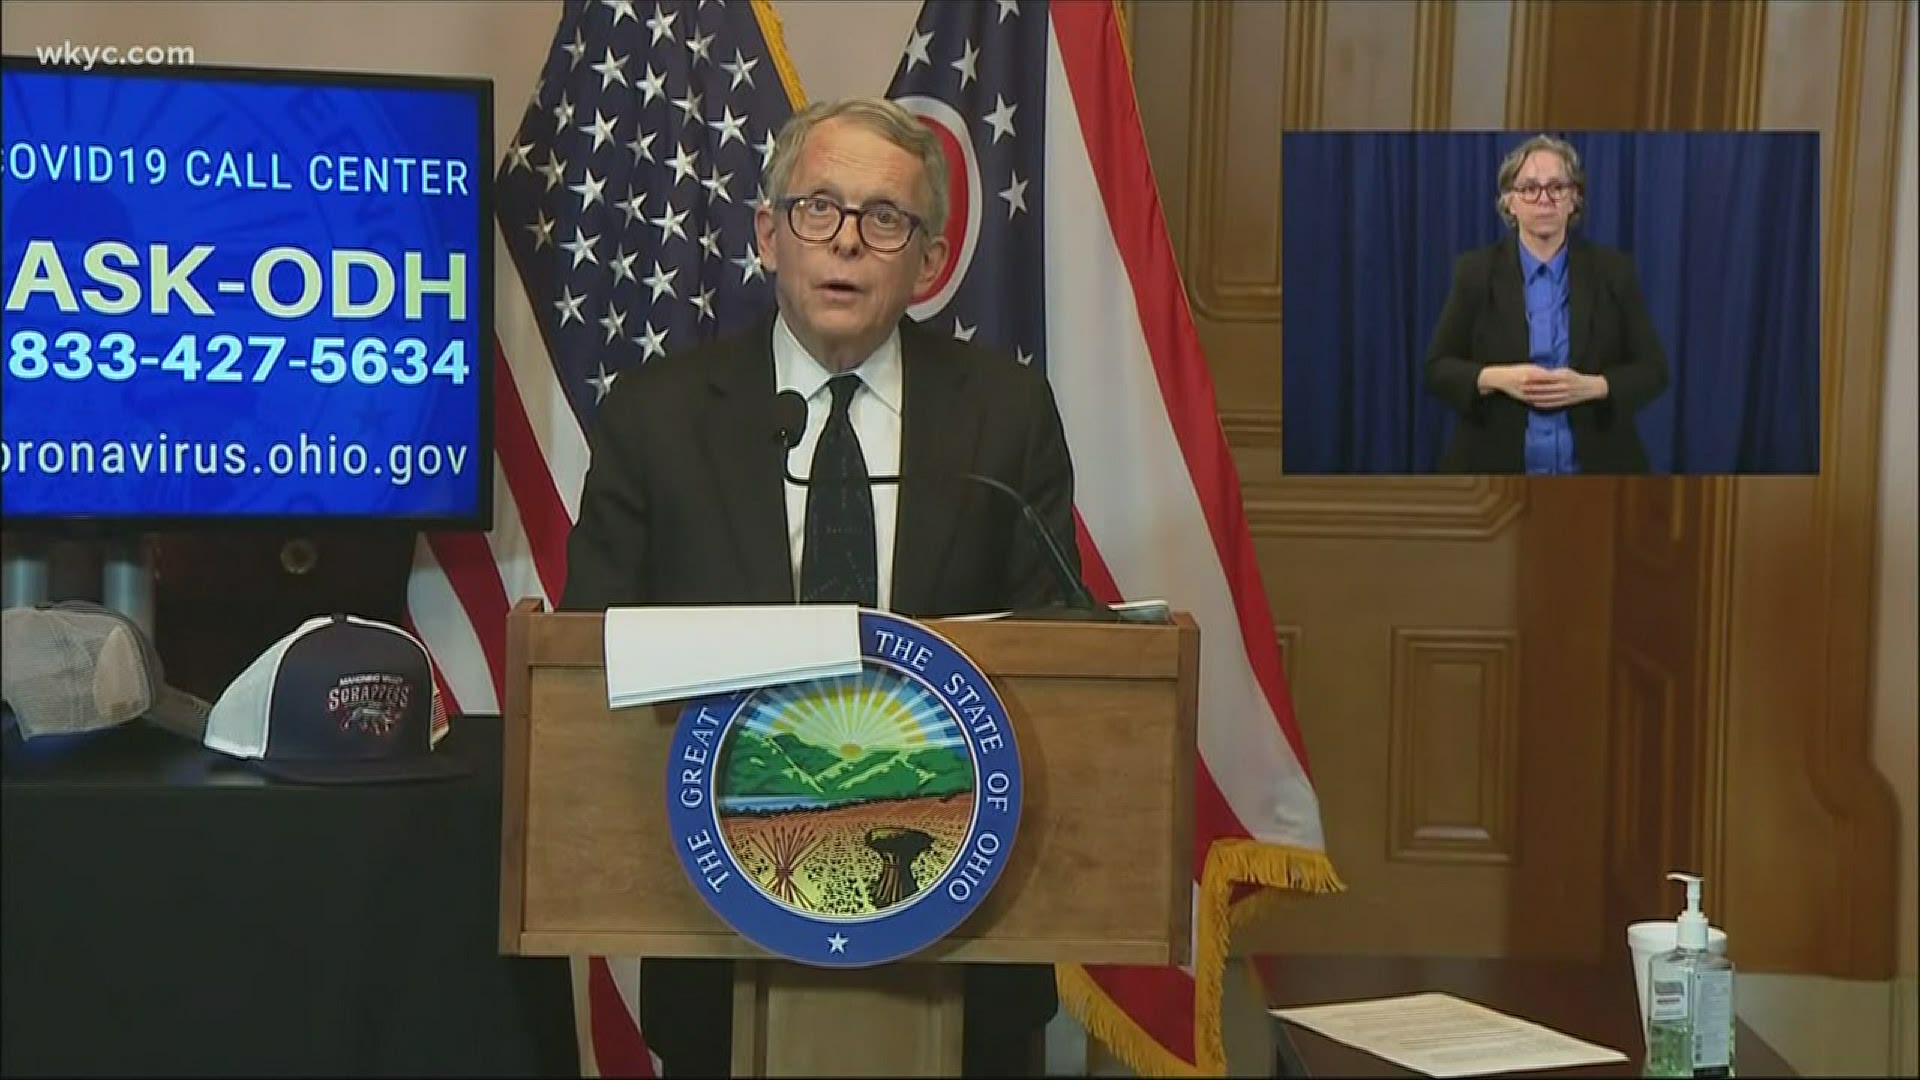 Ohio continues squashing the coronavirus curve and Governor Mike DeWine says we have hit a home run. Lives have also been saved by staying home.